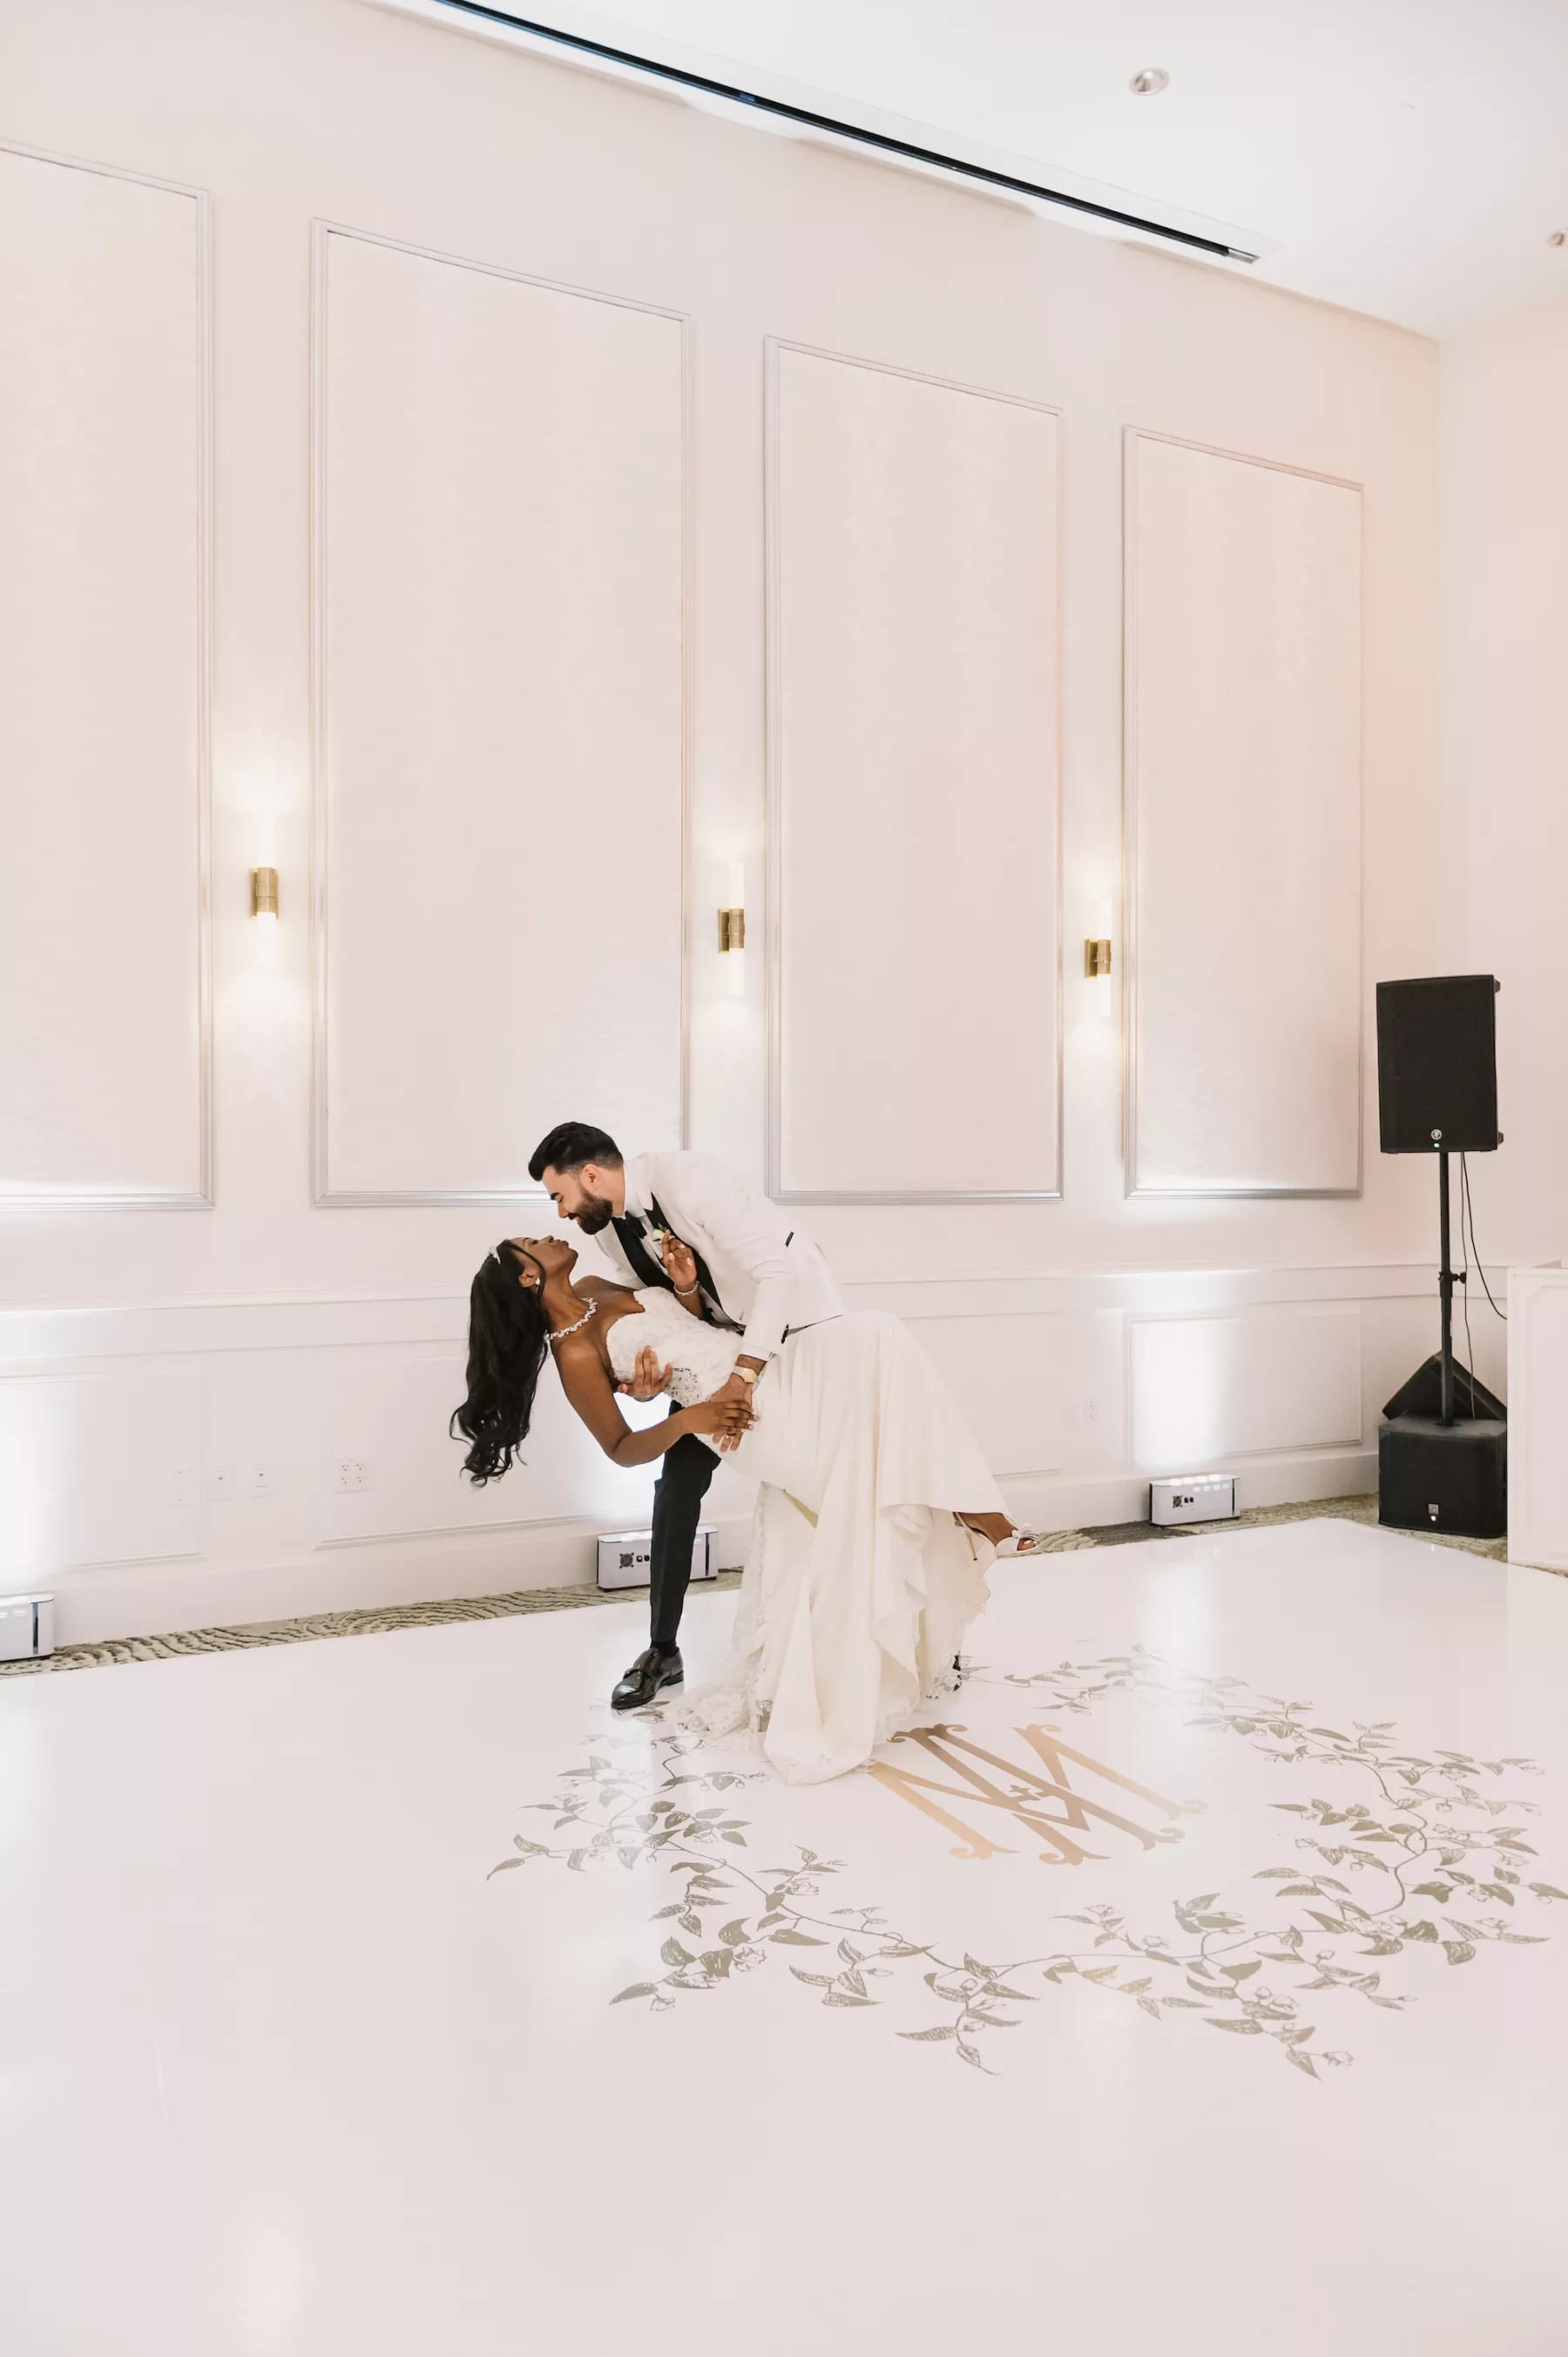 Bride and Groom First Dance Ballroom Wedding Portrait | White Dance Floor with Custom Gold Monogram Ideas | Clearwater Planner Parties A La Carte